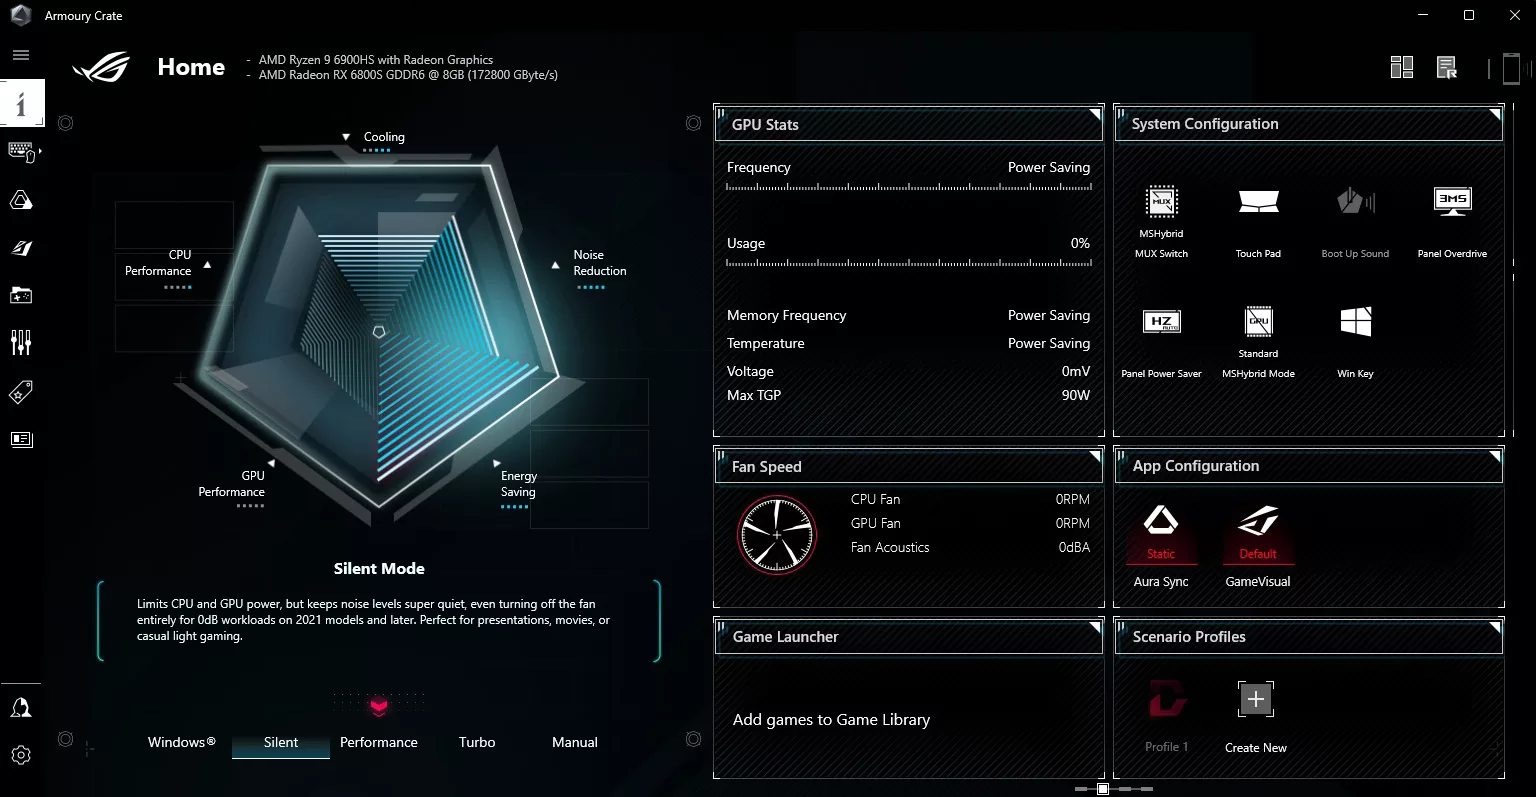 A screenshot of the Armoury Crate software with Silent mode enabled.